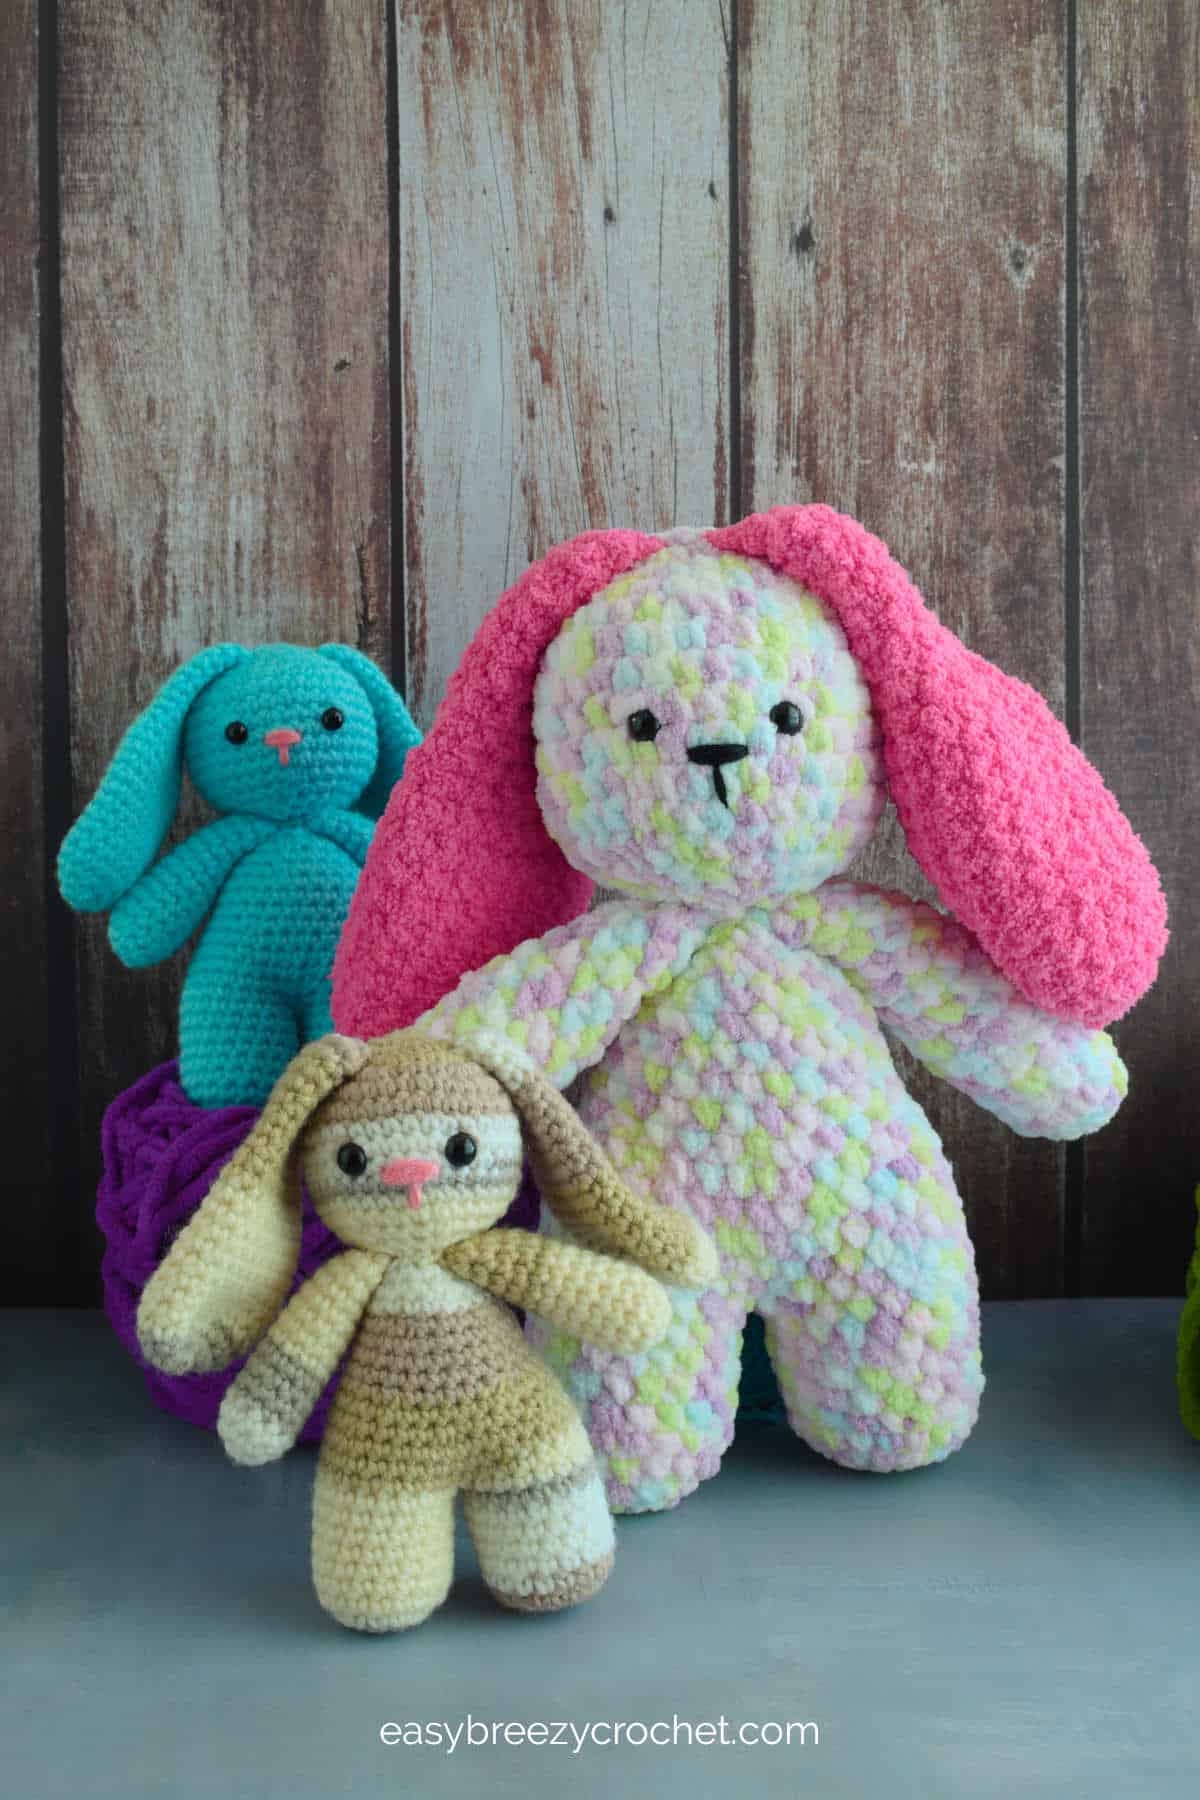 A large crochet bunny with hot pink ears, and two smaller crochet bunnies.